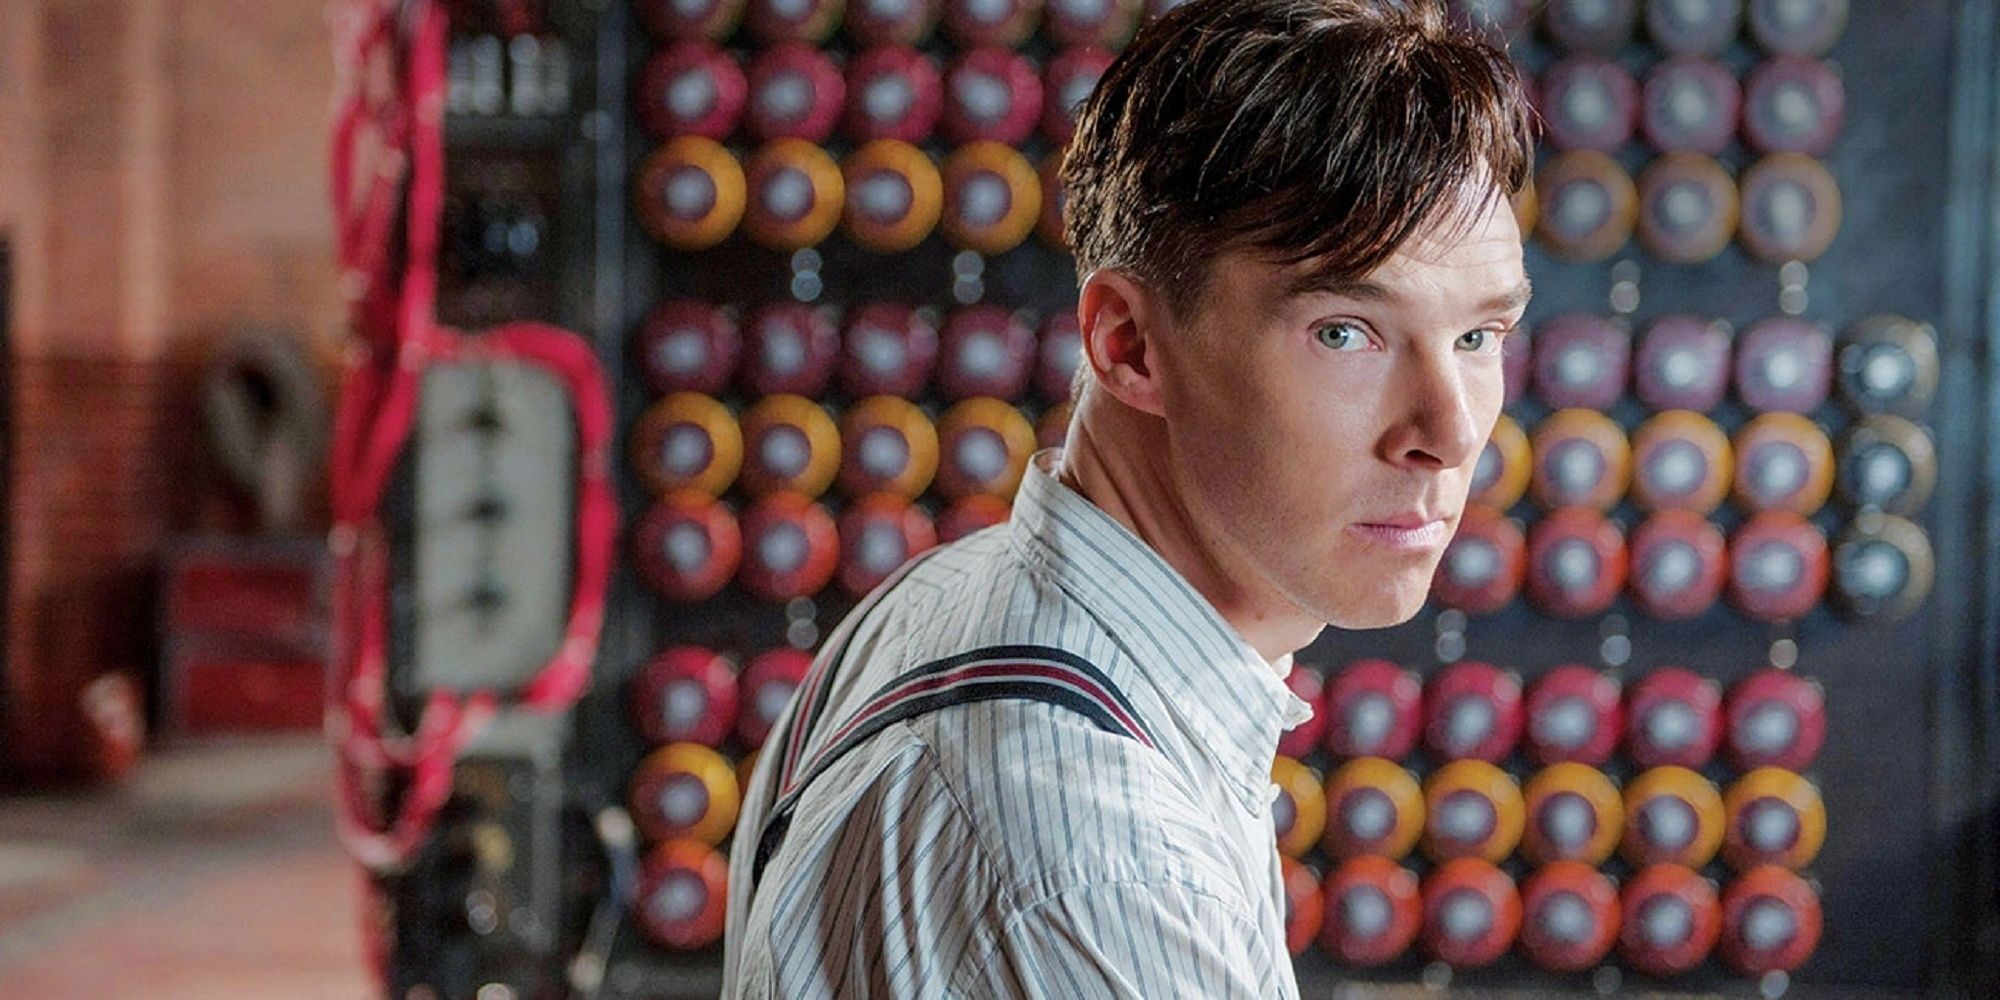 Alan Turing turning back to look at the camera in The Imitation Game.